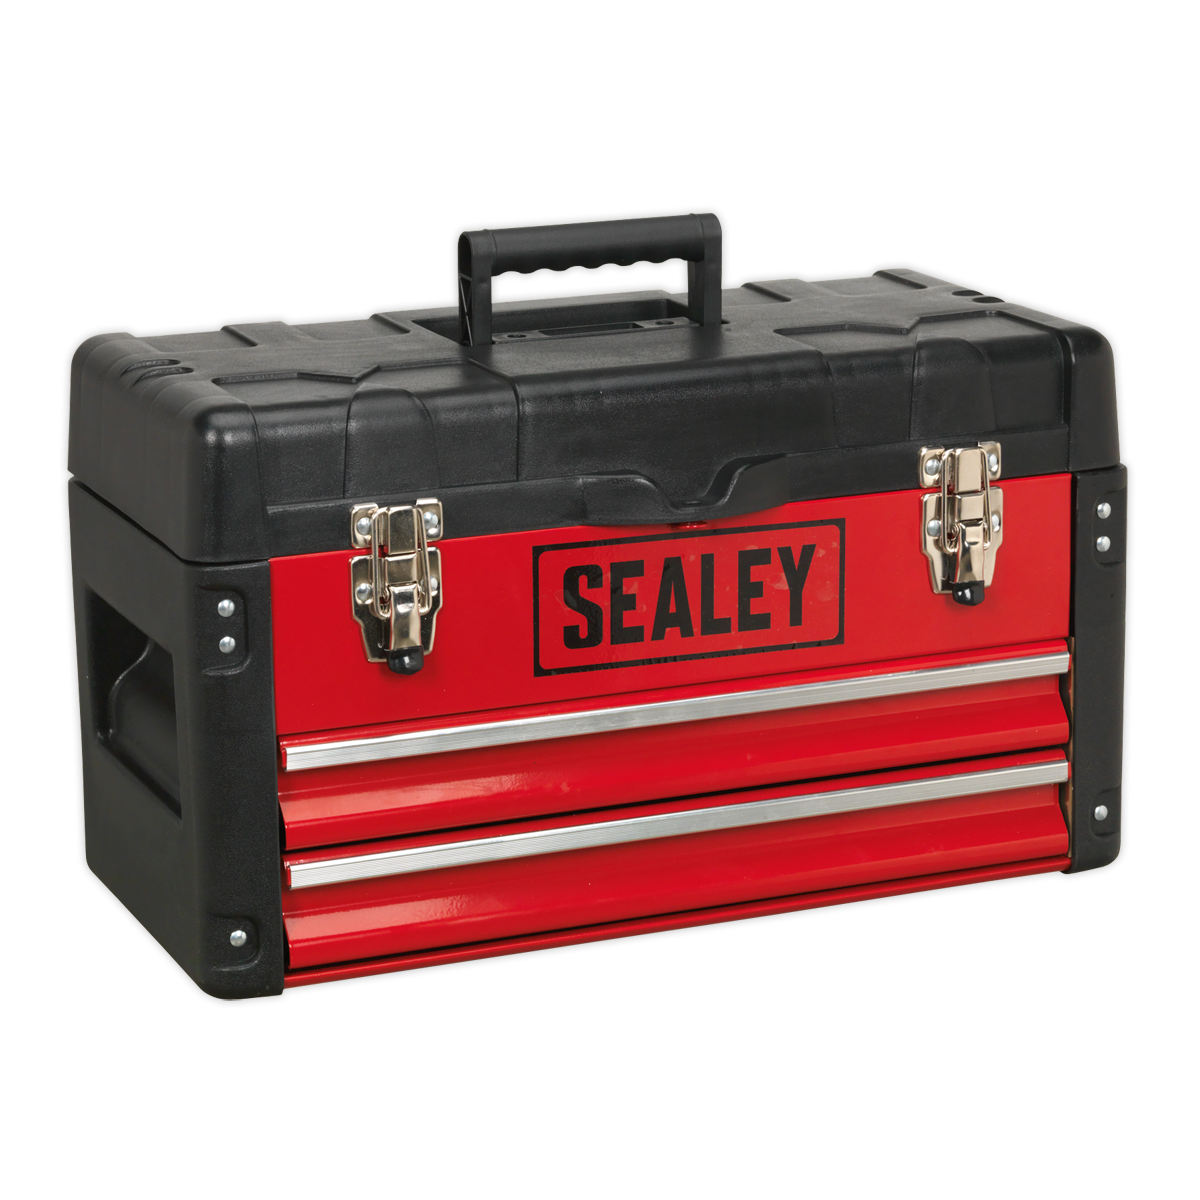 Sealey Toolbox with 2 Drawers 500mm